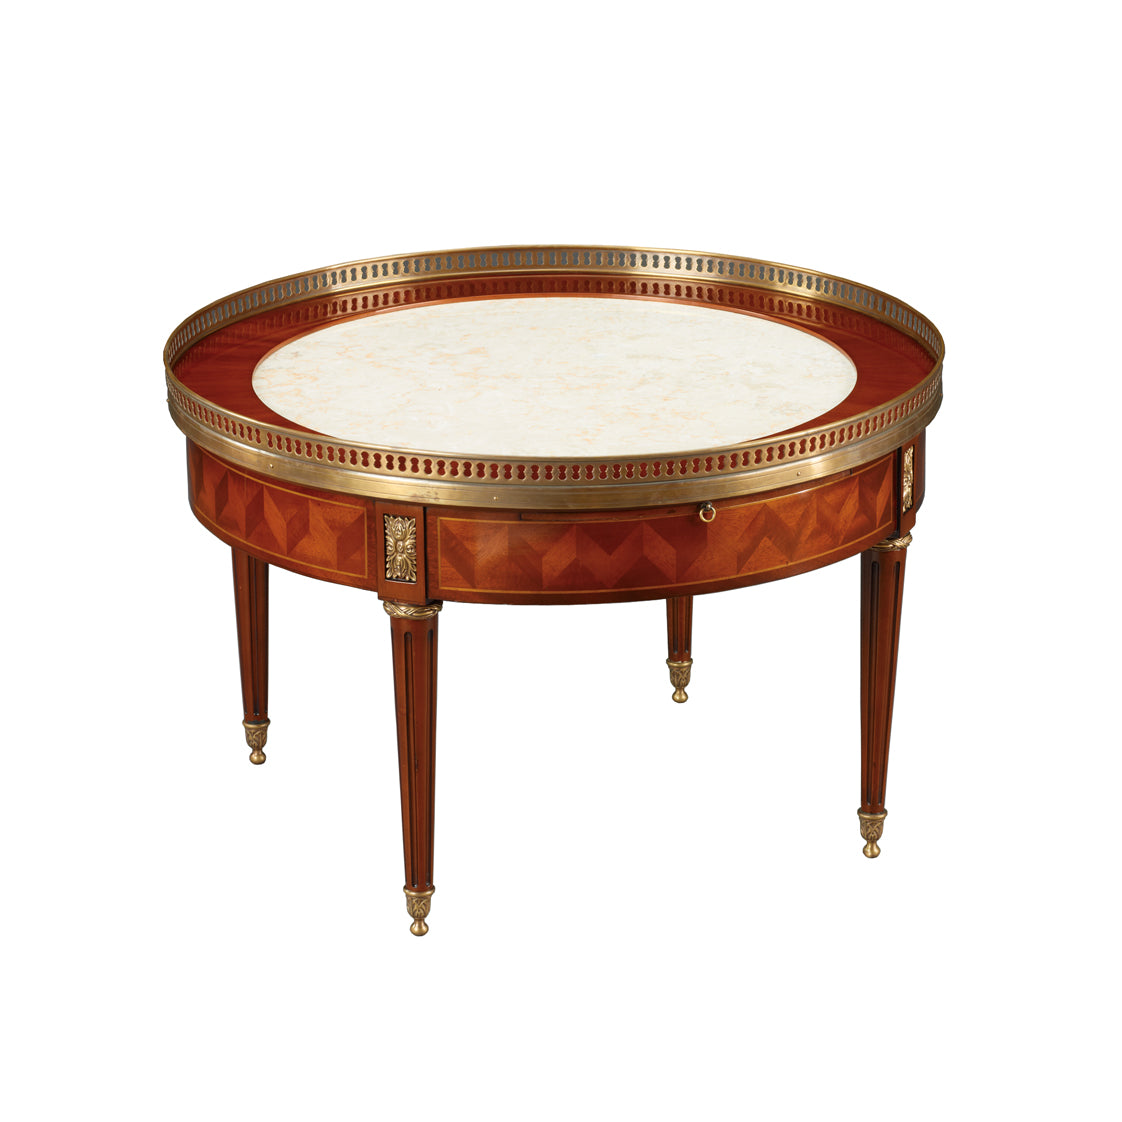 Louis XVI Parquetry Round Coffee Table features a pull out tray and marble top in brass trim edges.  Both top and legs are handcrafted and embellished in brass. French Coffee Table Furniture HK, Jansen Classical Furniture HK